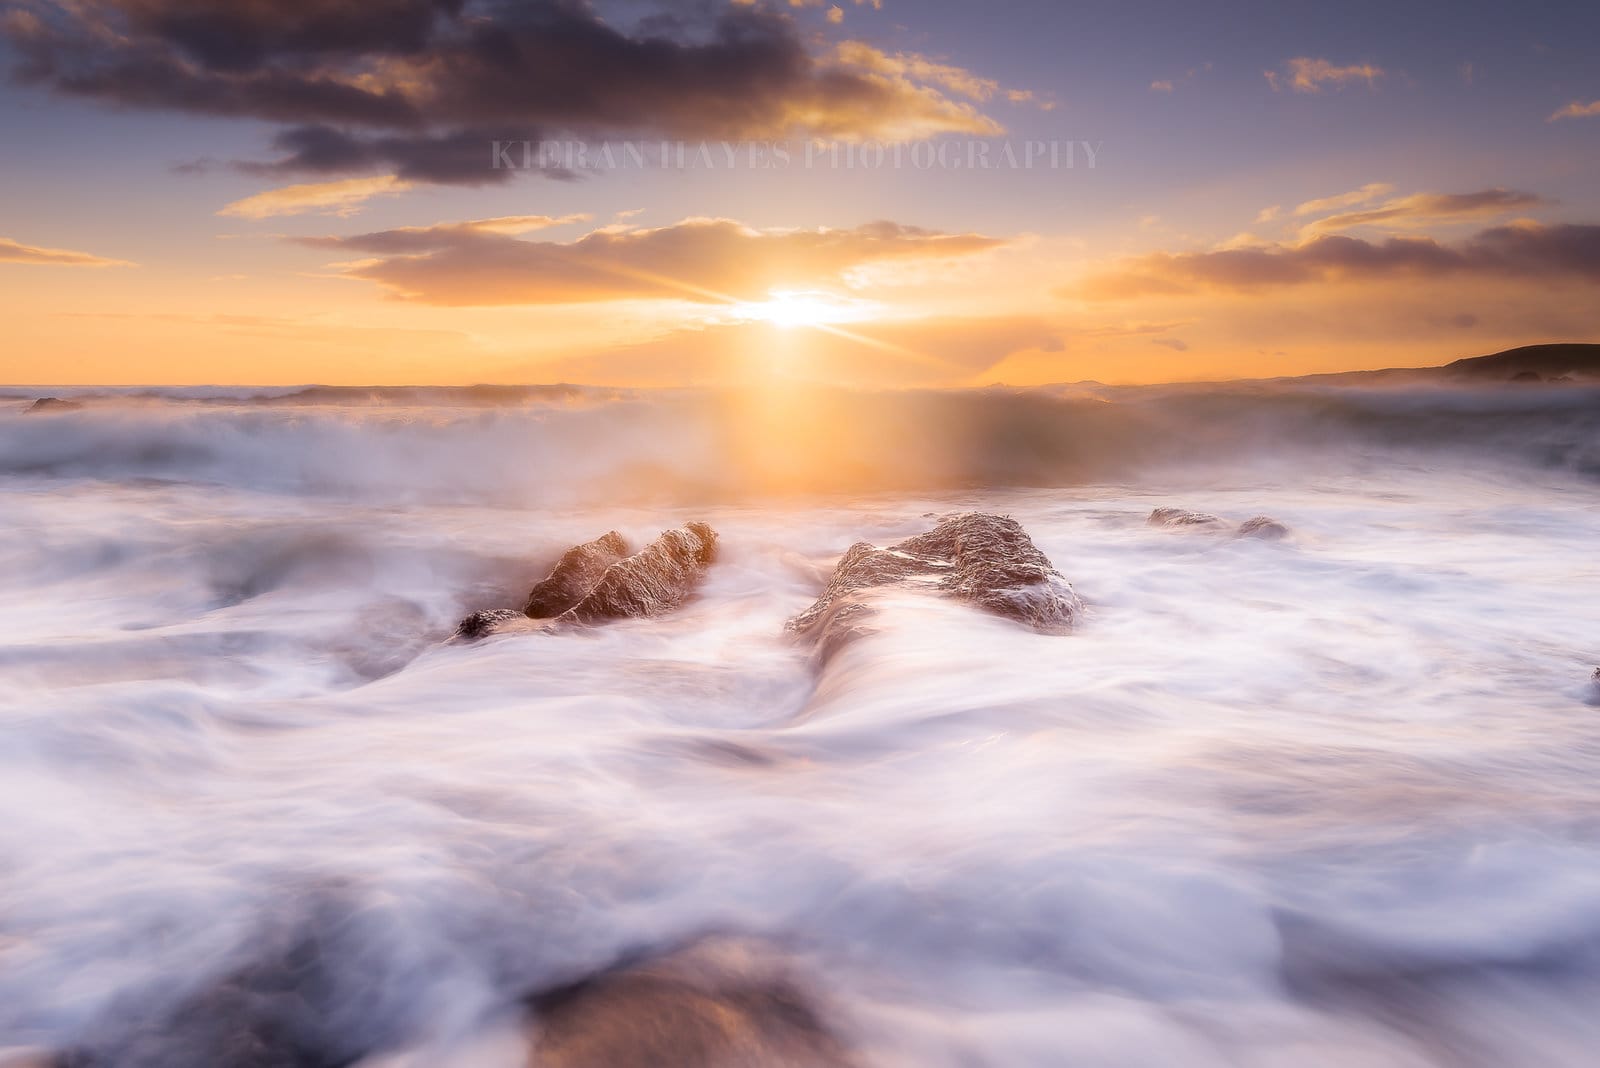 My Seascape photography tips and tricks to help you get amazing results today.